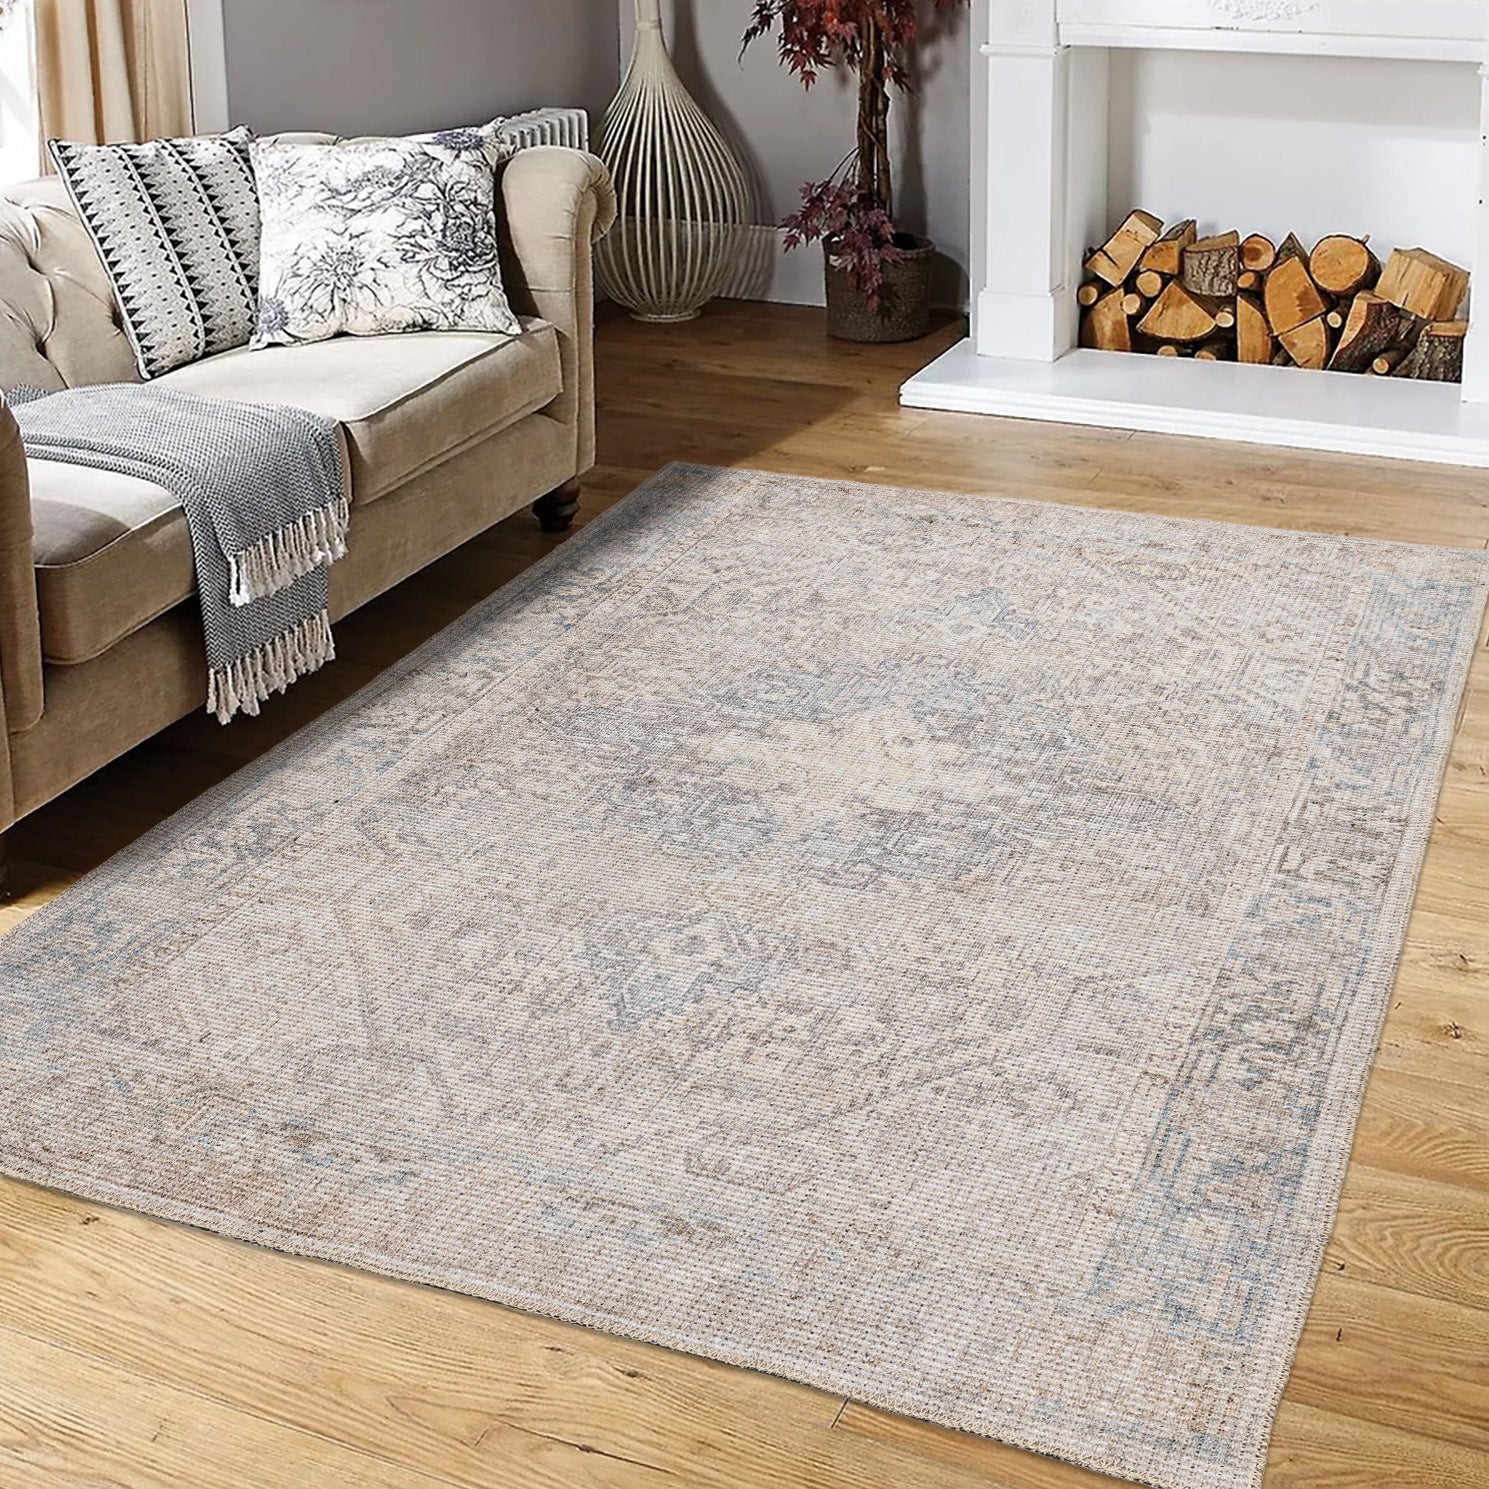 grey ivory cotton and polyster machine washable traditional rustic area rug 6x8, 6x9 ft Living Room, Bedroom, Dining Area, Kitchen Carpet